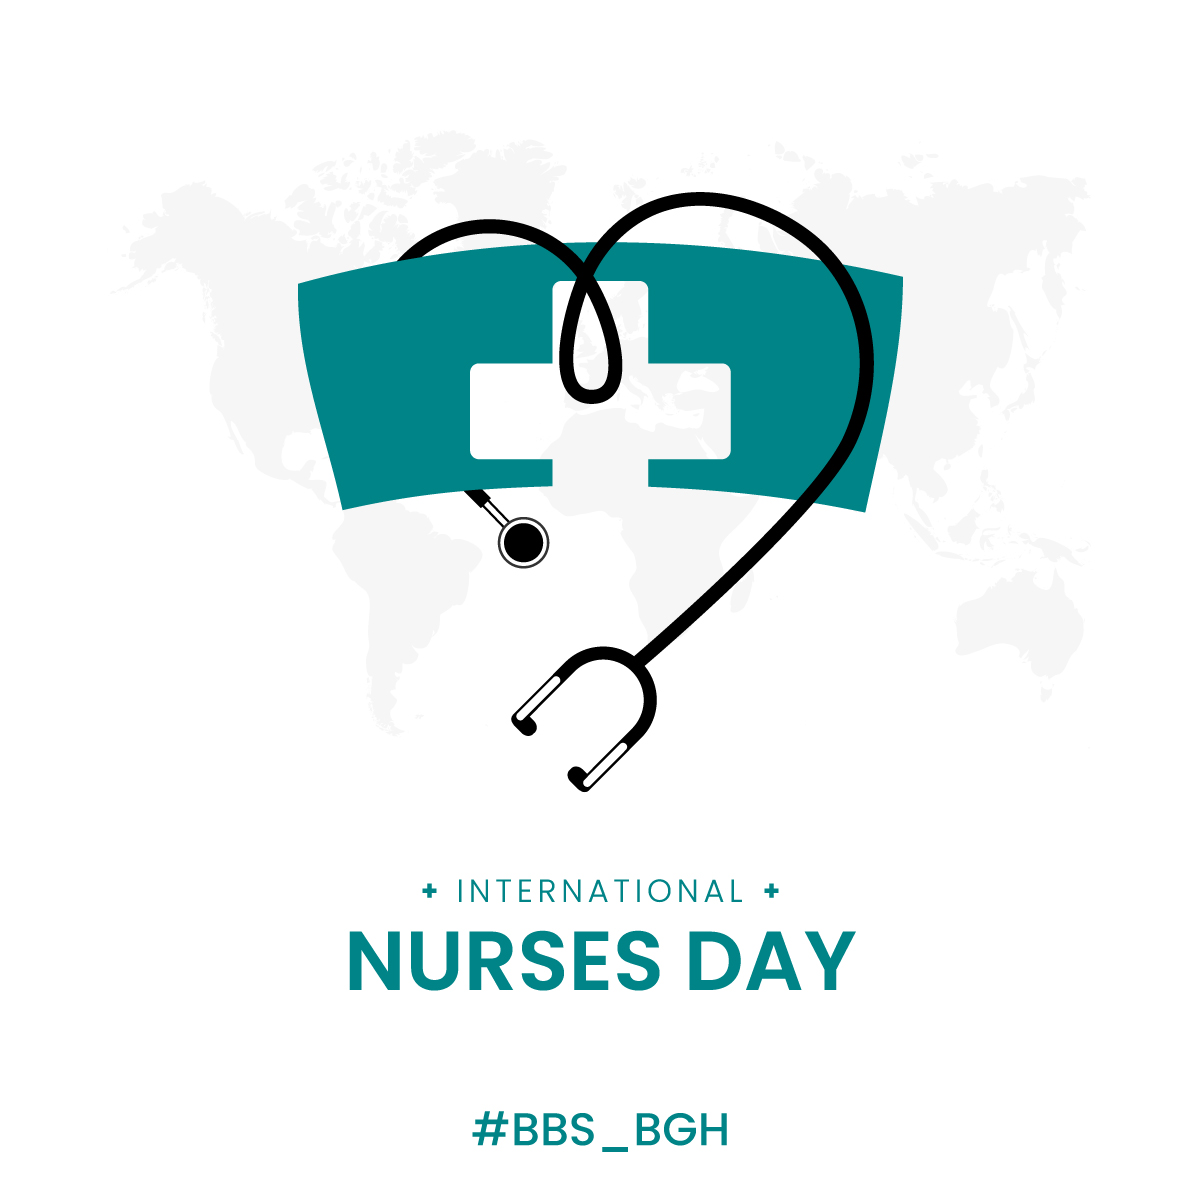 On #InternationalNursesDay, let's celebrate the selfless contributions of nurses worldwide who work tirelessly to care for patients, comfort families, and save lives.

Thank you for your invaluable service!

#NurseHeroes #ThankYouNurses #WeAppreciateYou #BalBhartiSchool #BBS_BGH